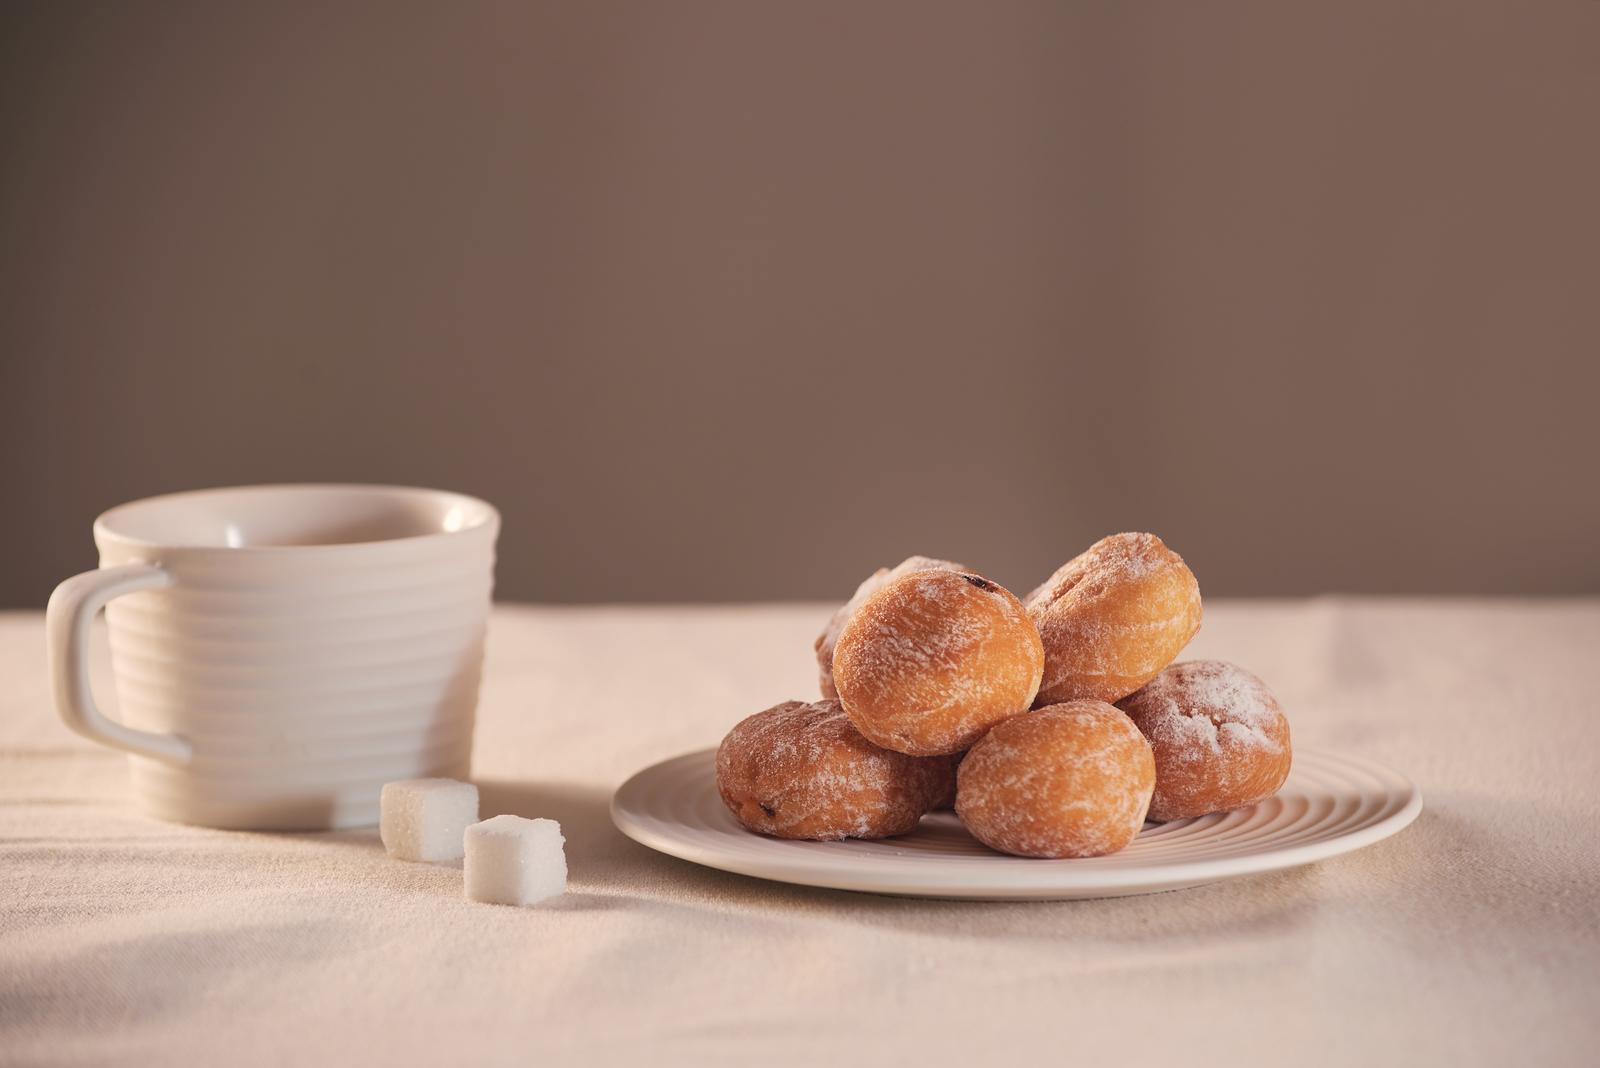 Donuts with sugar